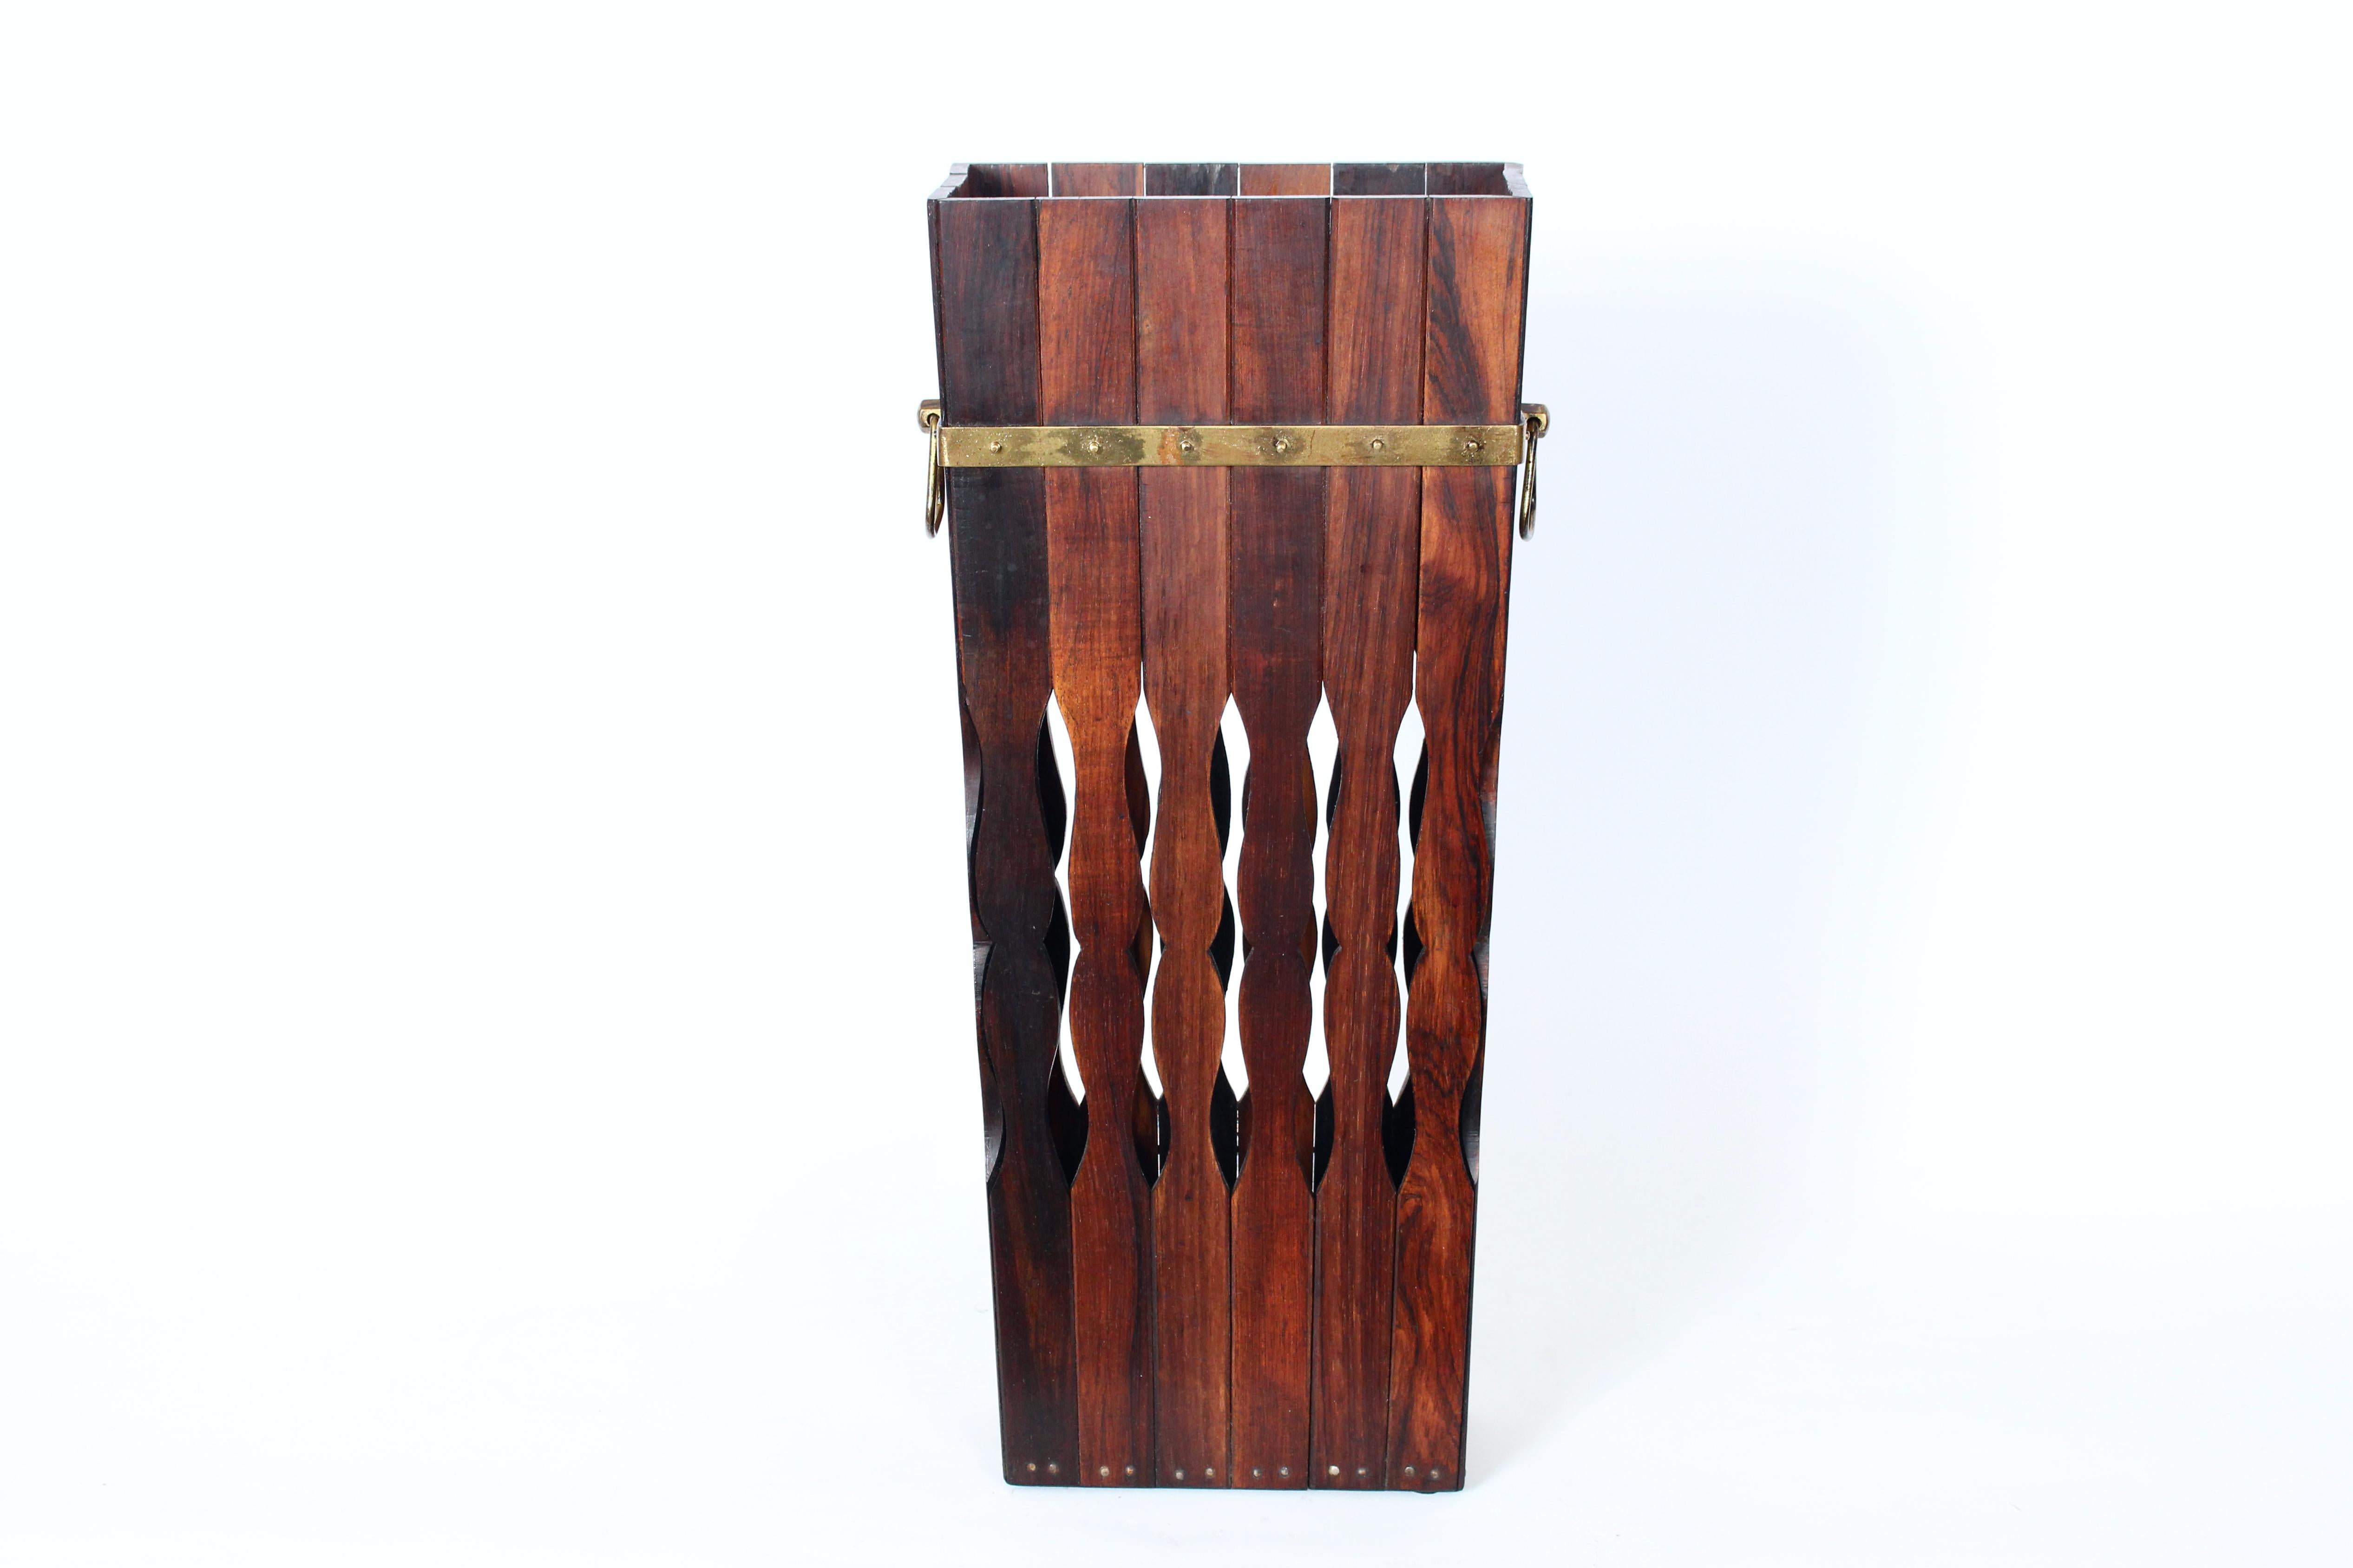 Modernist Brass Handled Brazilian Rosewood Umbrella Stand. Cane Stand. Featuring cut-out Rosewood slats, patinated Brass banding, nailhead stud accents, detailed with Brass handles. Base (7.75W x 4D). Sturdy. Balanced. Fine design. Made in Brazil by